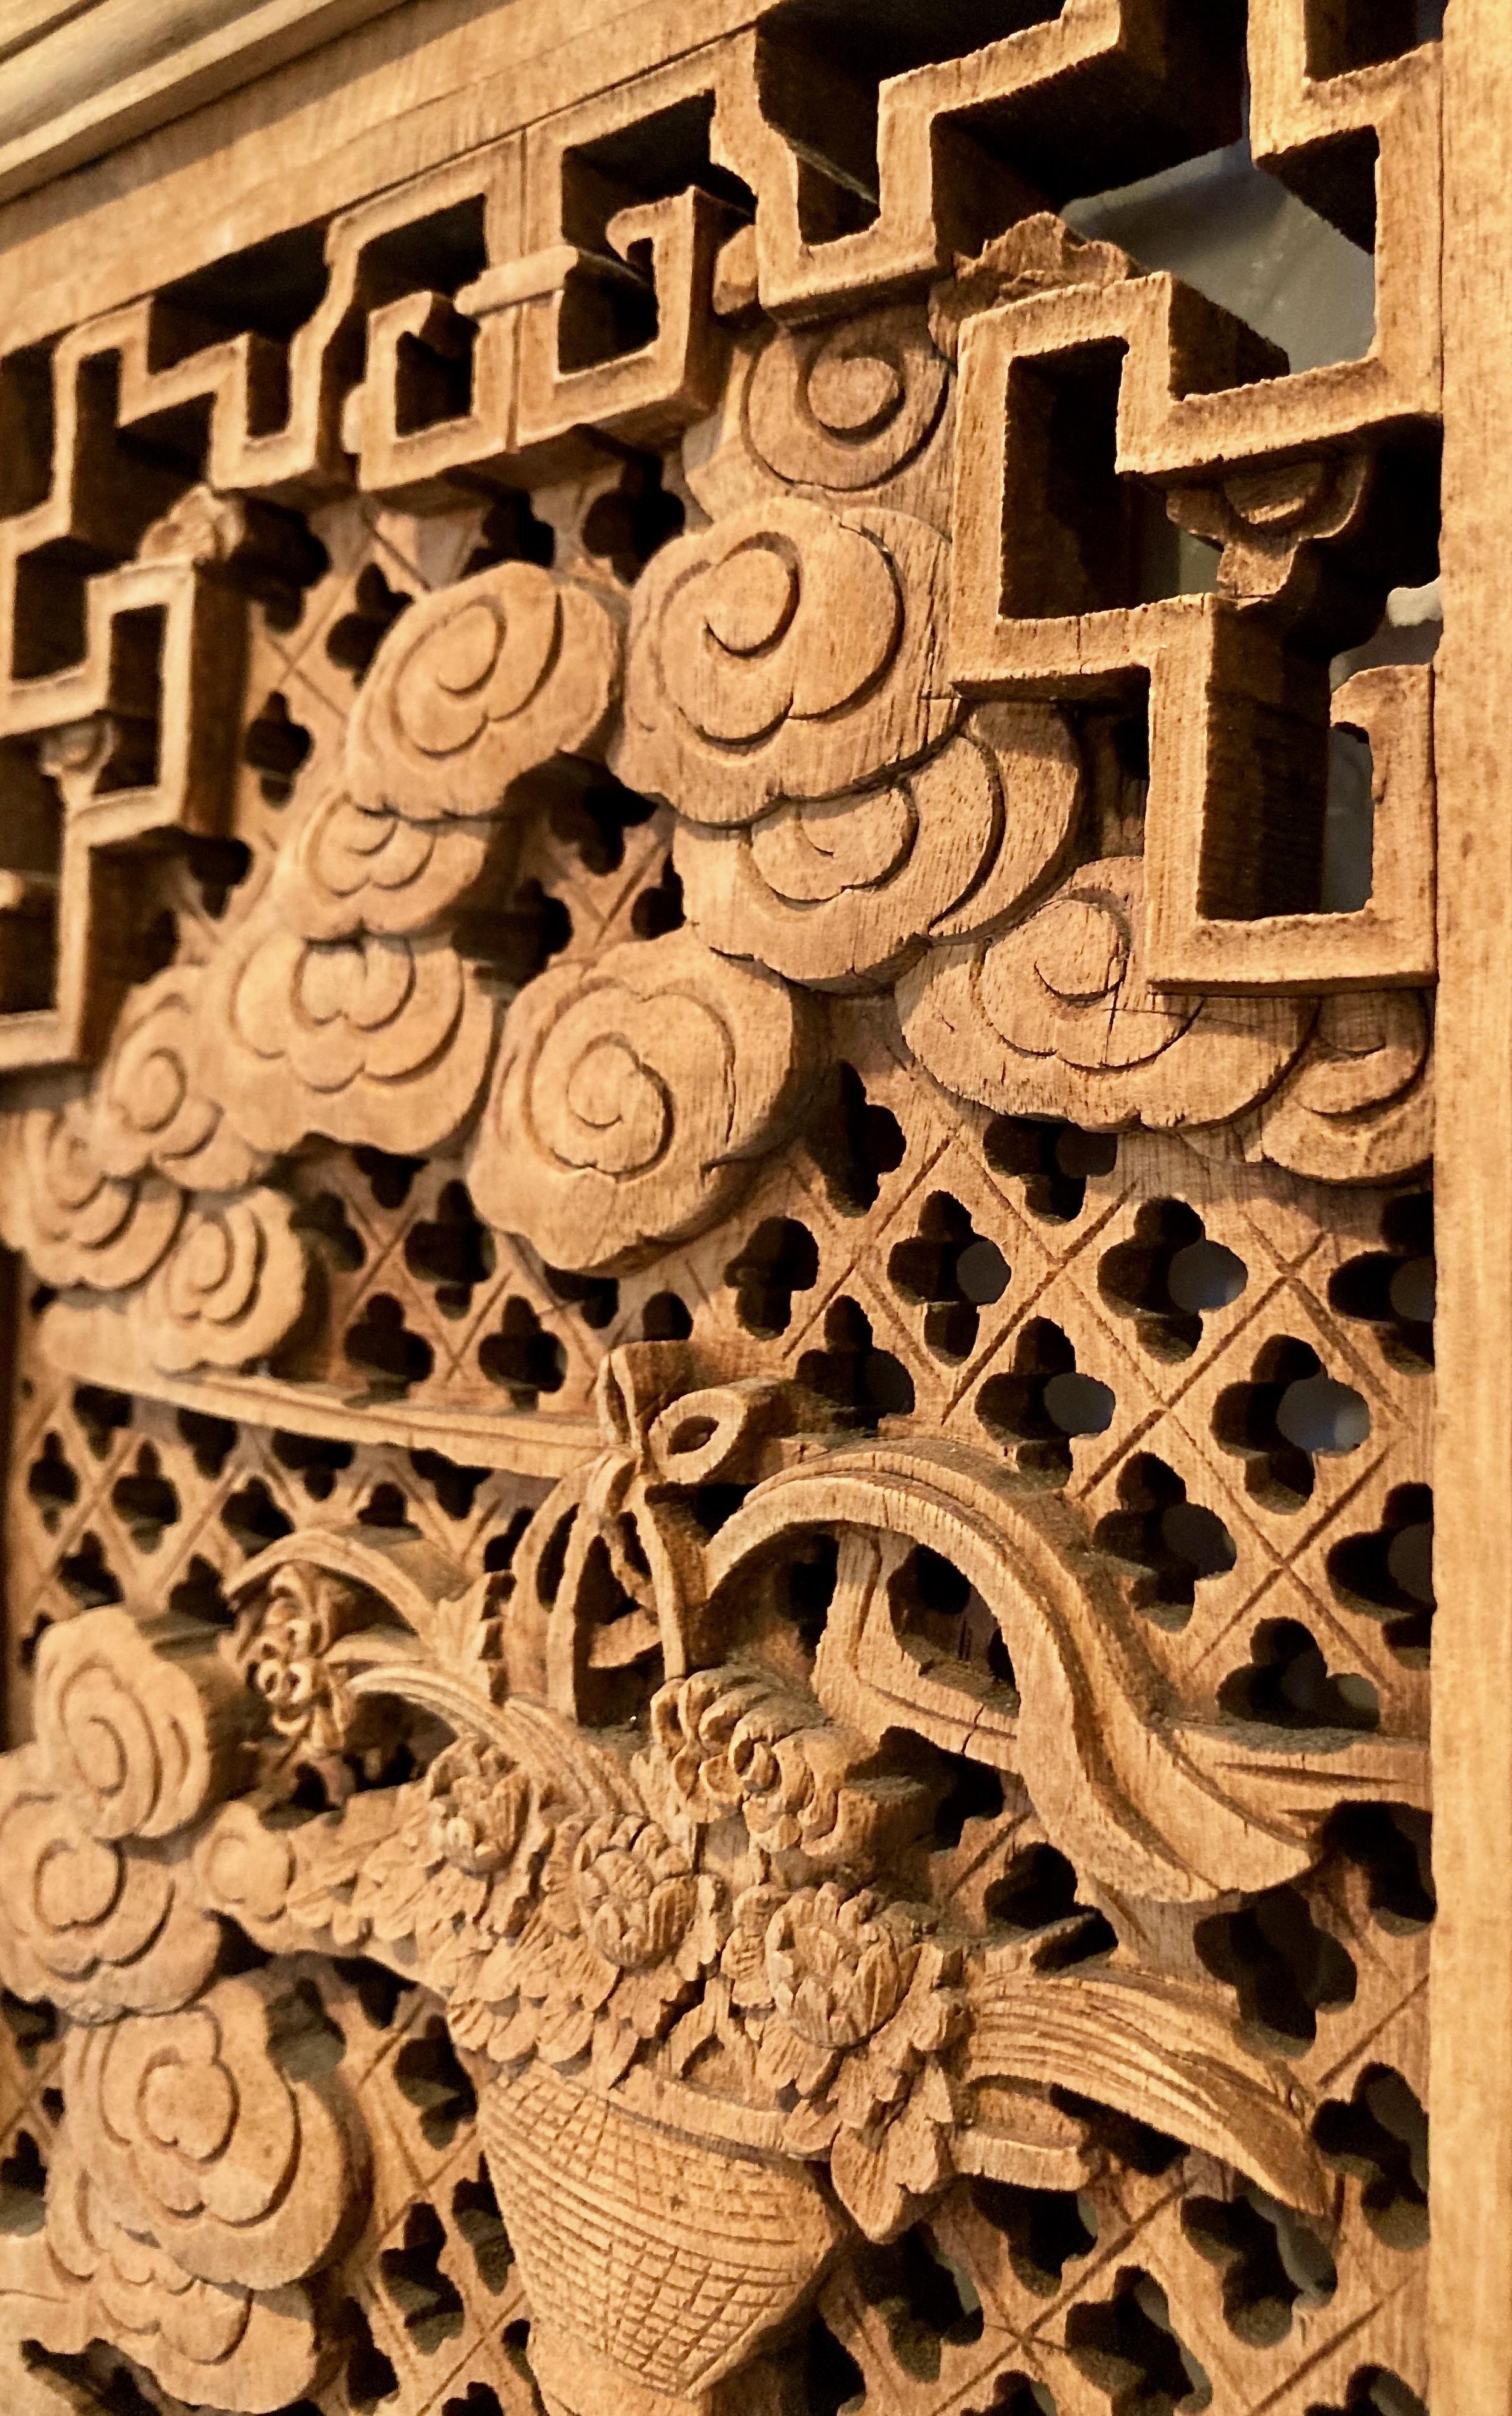 The wonderful design in this framed panel includes personage carvings with surrounding tree, floral and dwelling motifs.